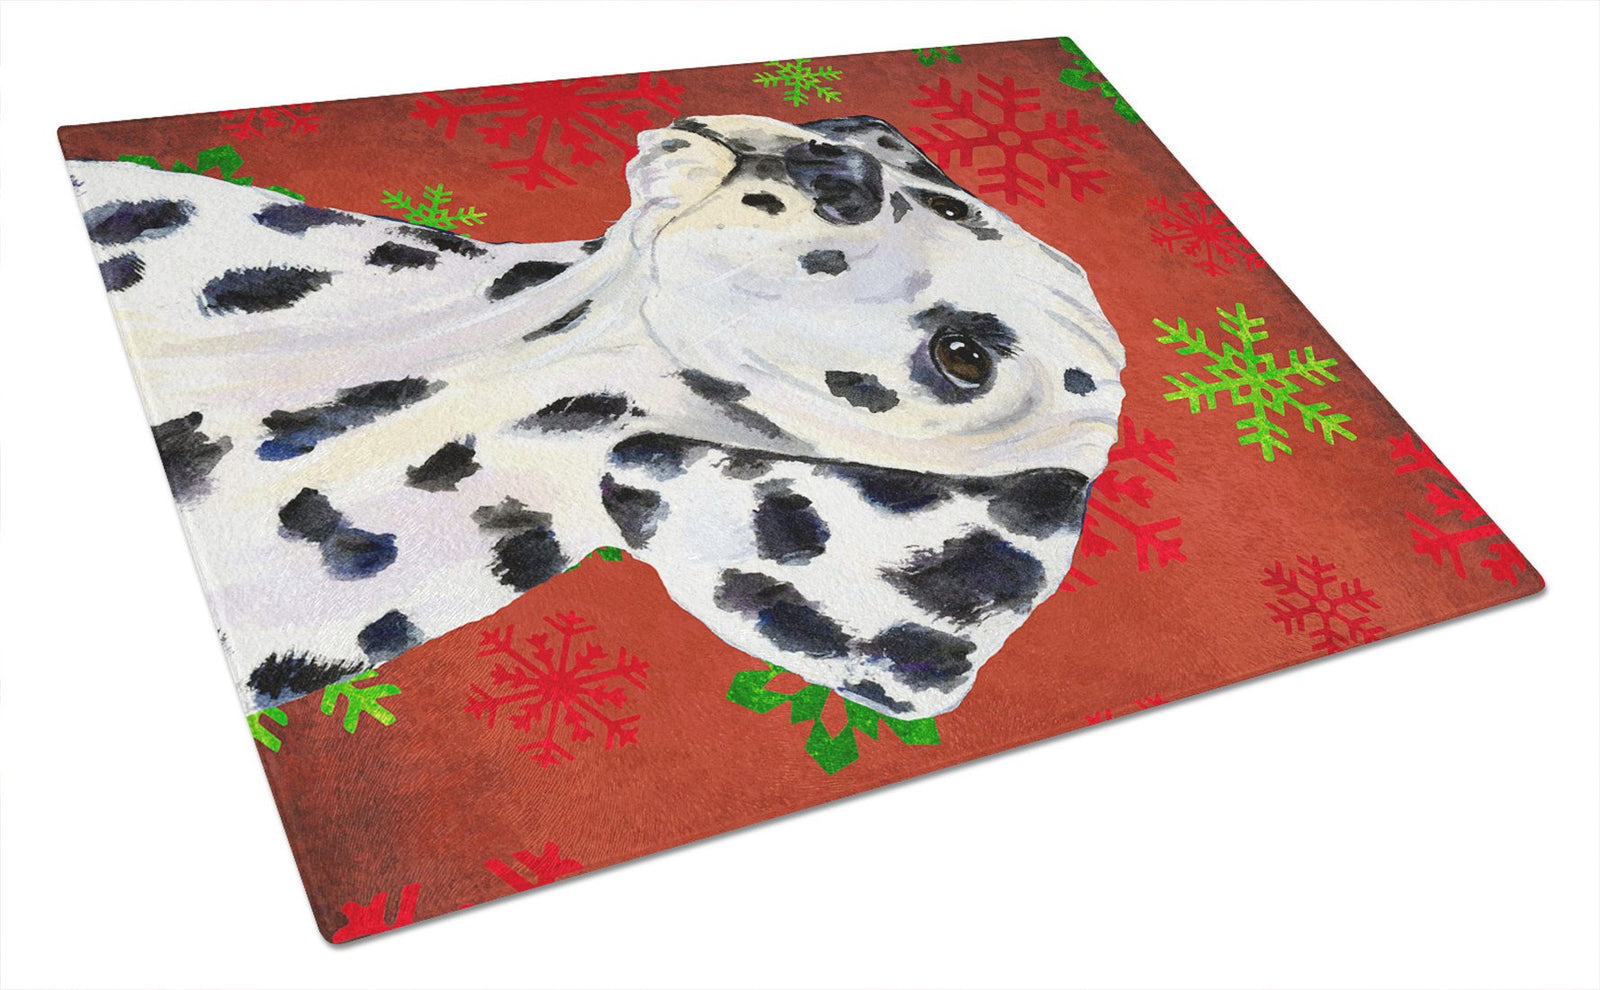 Dalmatian Red and Green Snowflakes Holiday Christmas Glass Cutting Board Large by Caroline's Treasures